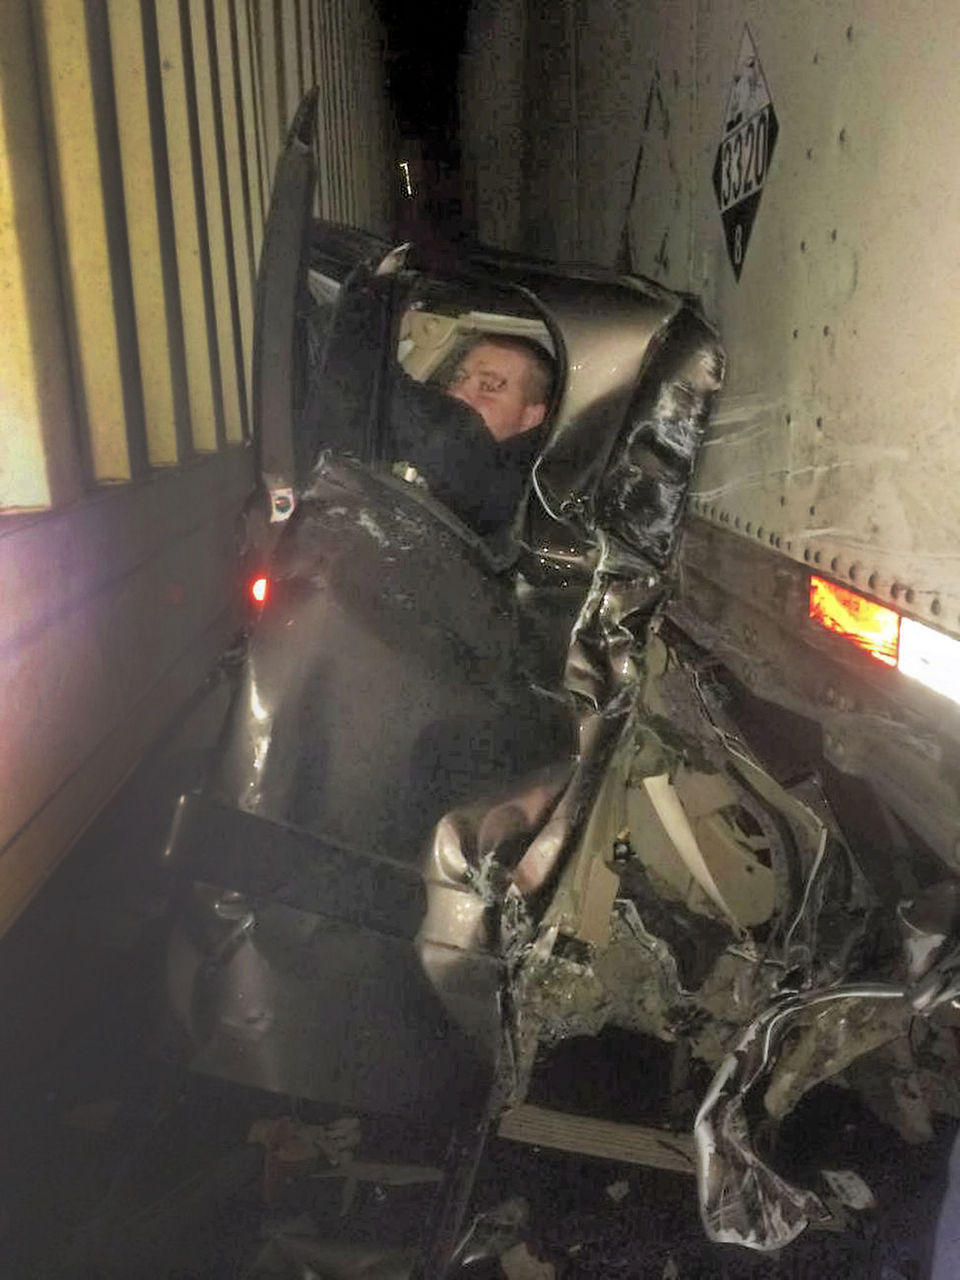 Unreal pic of a pick-up sandwiched between two semi-trucks; driver miraculously survived with no serious injuries-“Kaleb Whitby, 27, who miraculously escaped with minor injuries, was sandwiched in his pickup truck between two trailers in the Baker City crash. The photographer, Sergi Karplyuk, helped the man out of his car. Whitby’s injuries only required two band-aids and ice. Photo by Sergi Karplyuk”